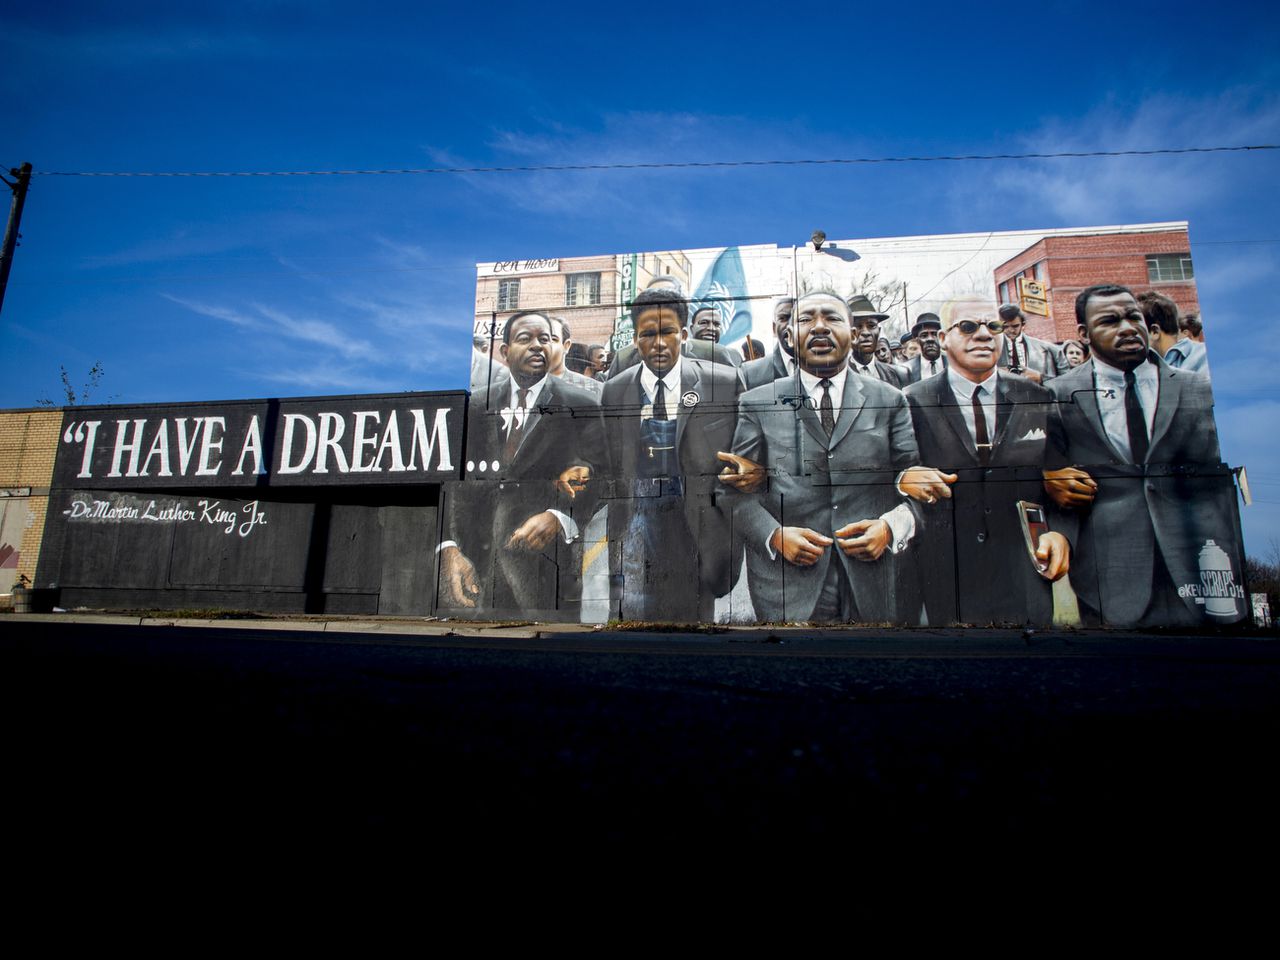 New Flint mural pays homage to civil rights icons Martin Luther King Jr. and John Lewis